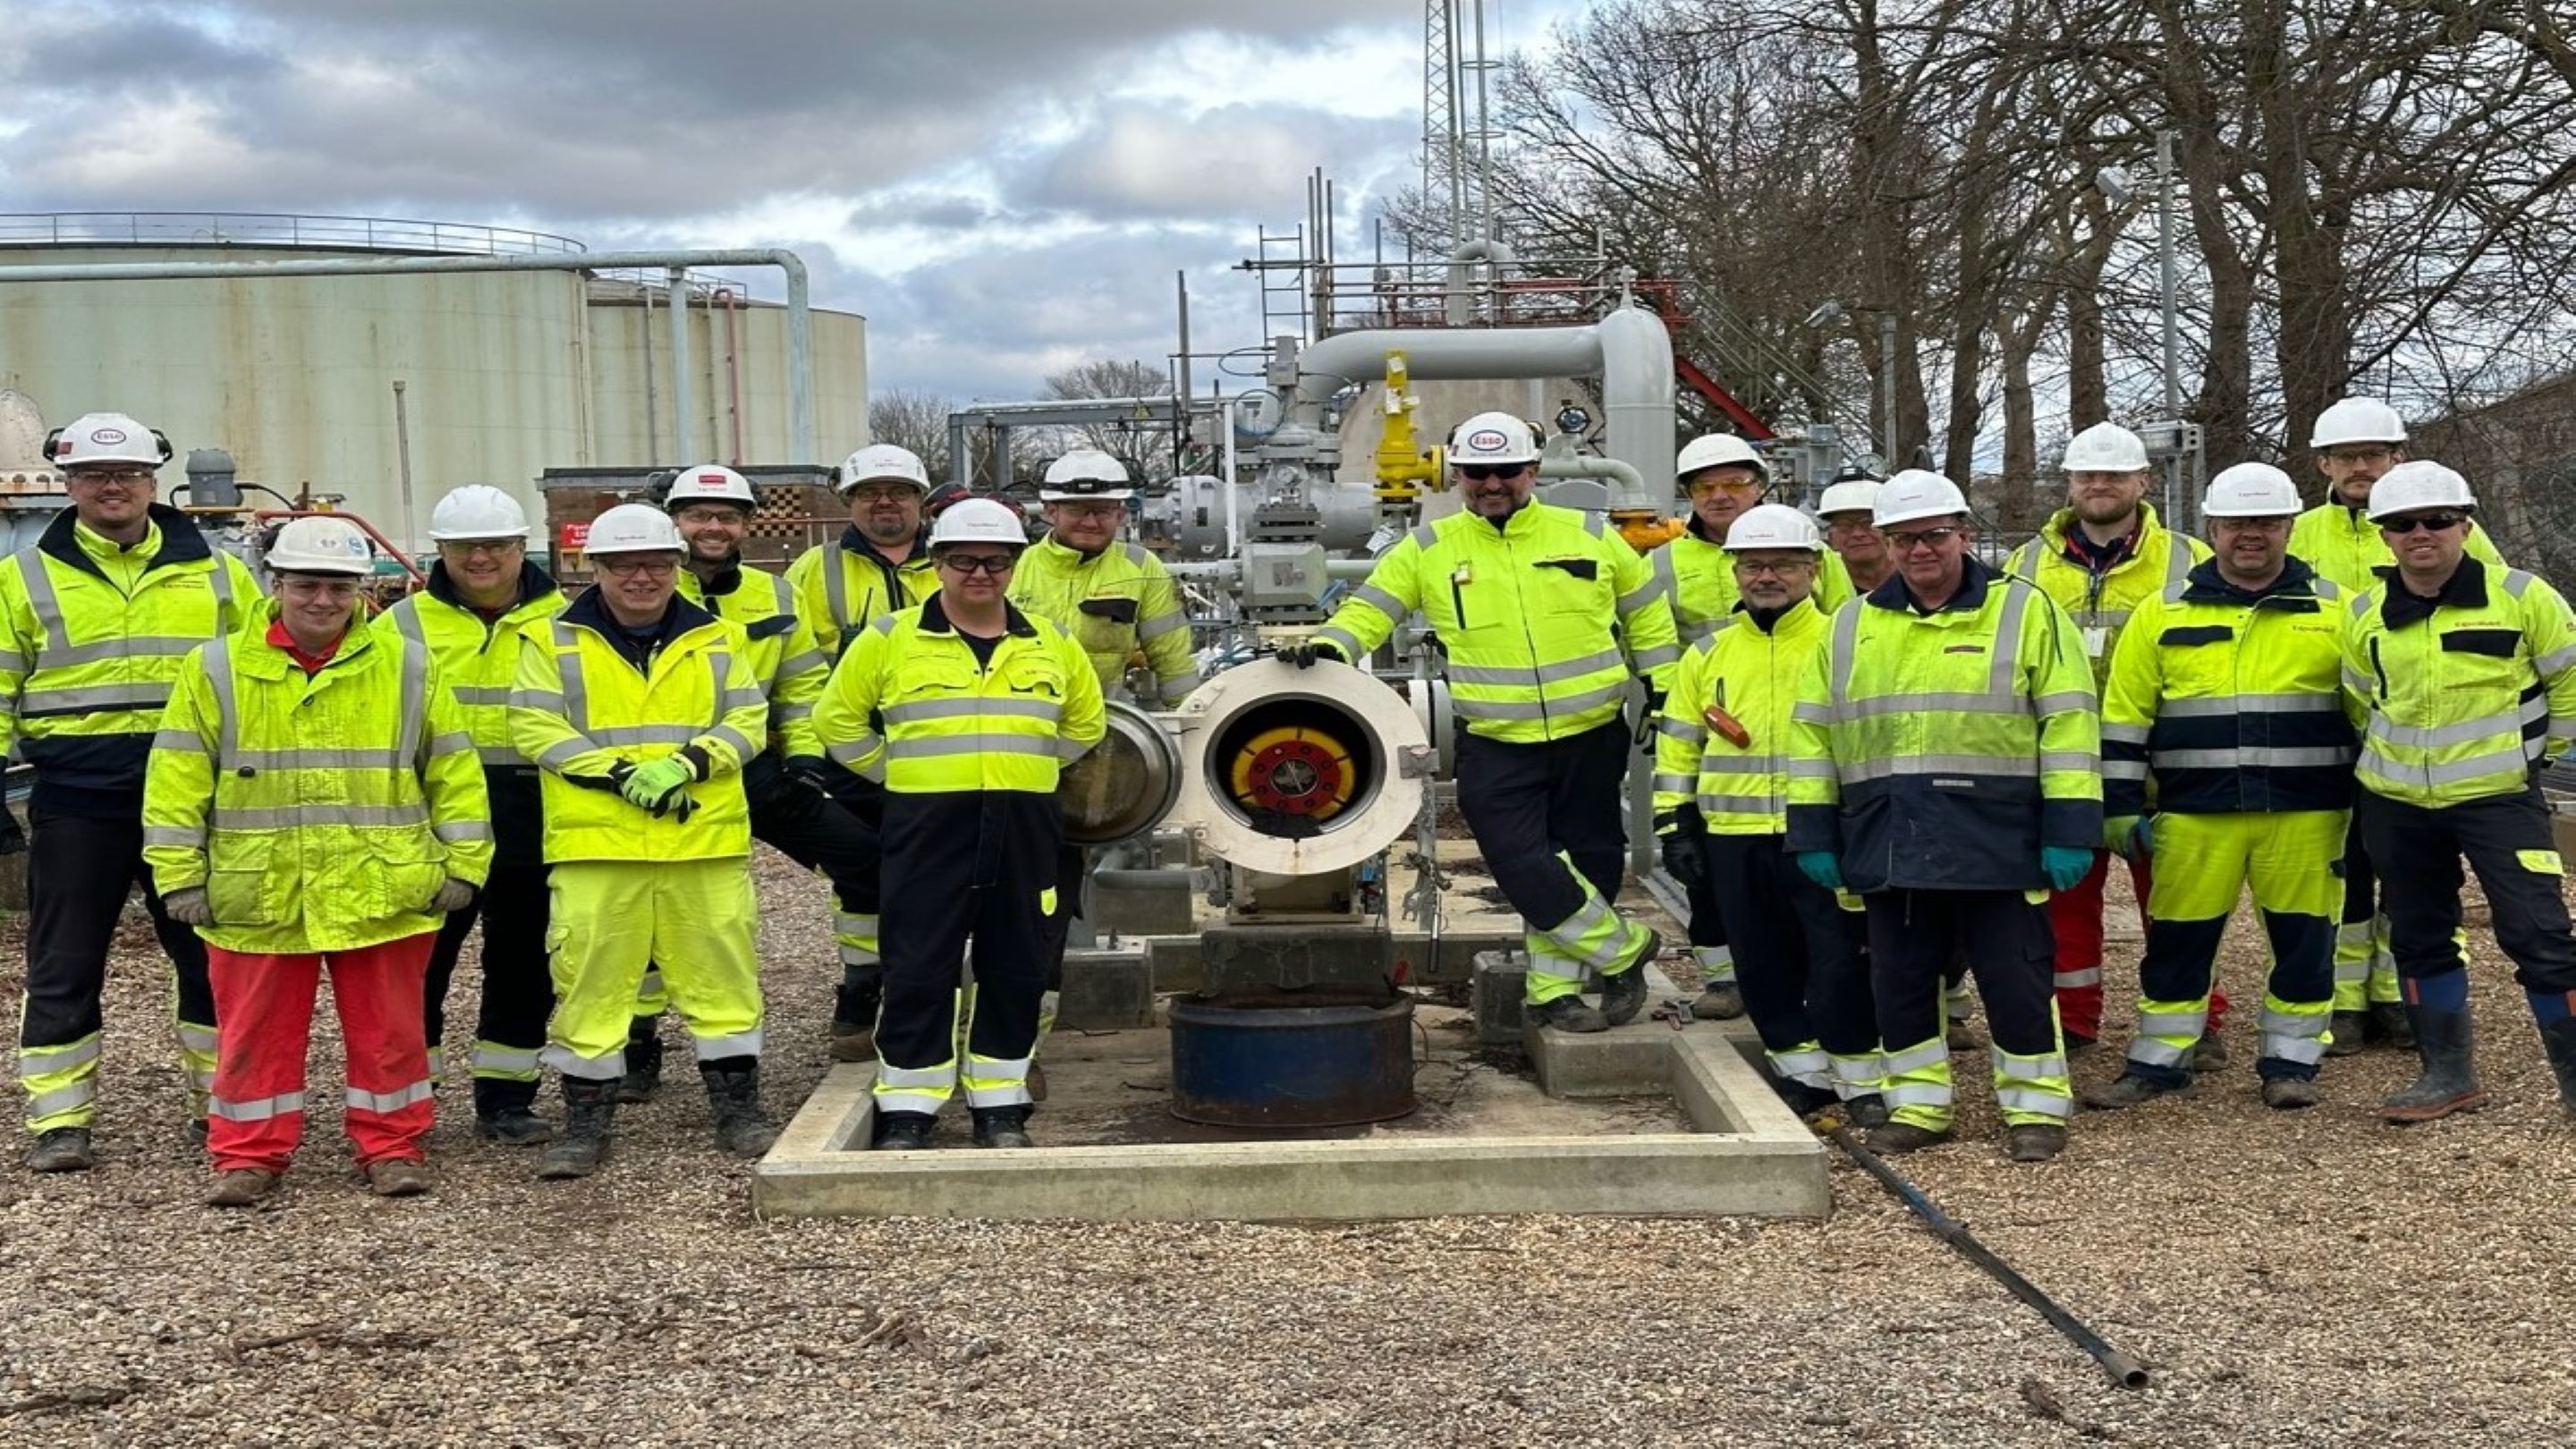 Southampton to London Pipeline completed ahead of schedule